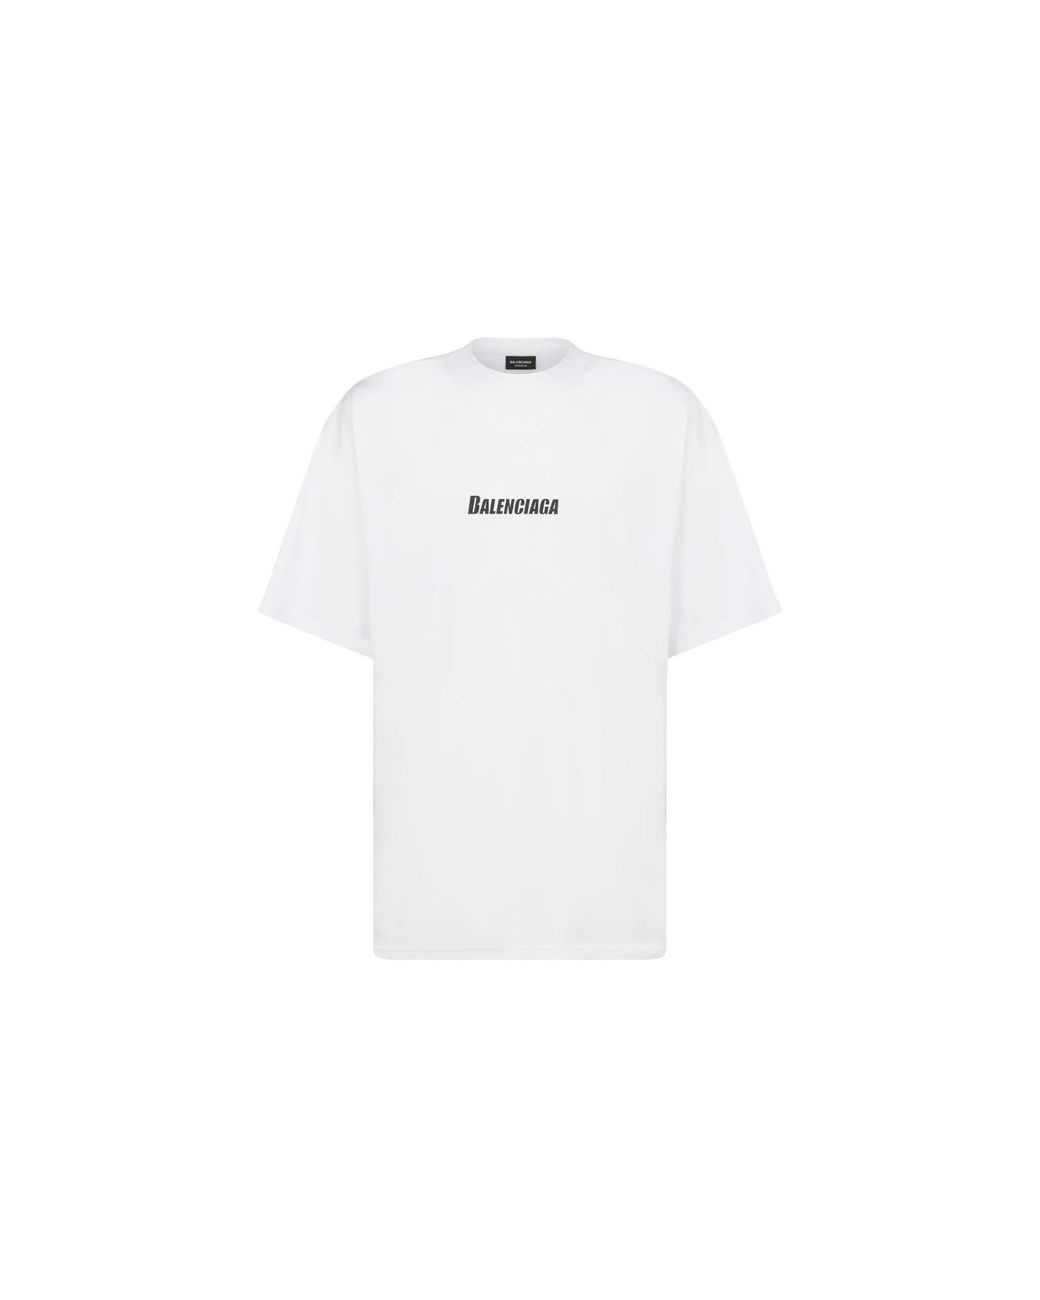 Balenciaga Synthetic T-shirt in White for Men - Save 54% | Lyst